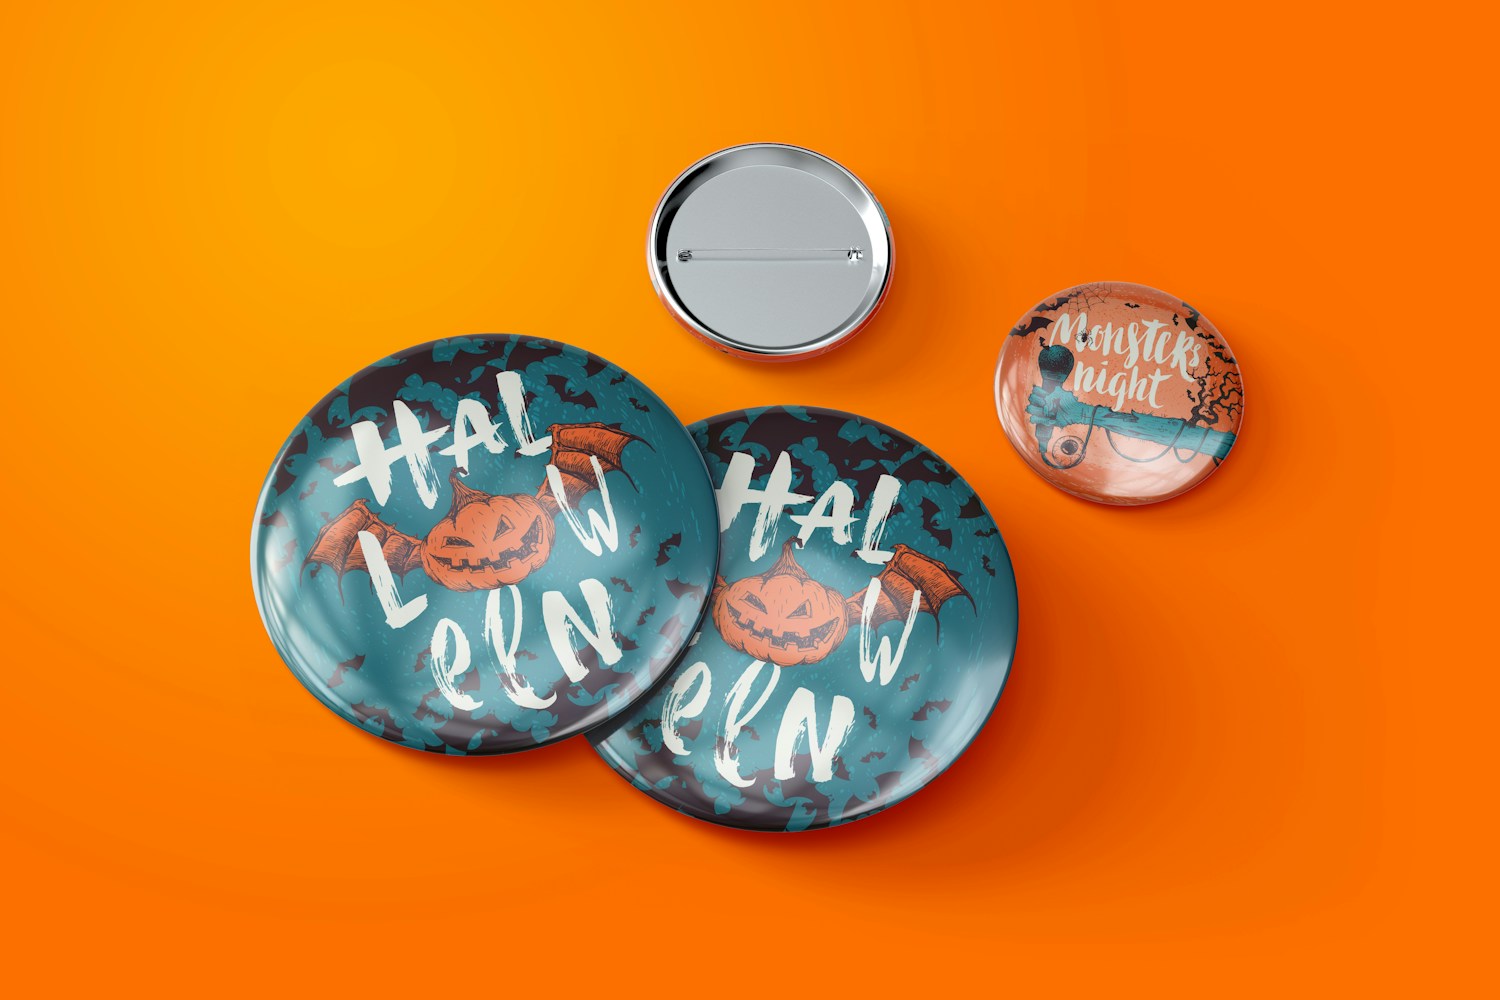 Pin Button Badges Mockup, Two Size